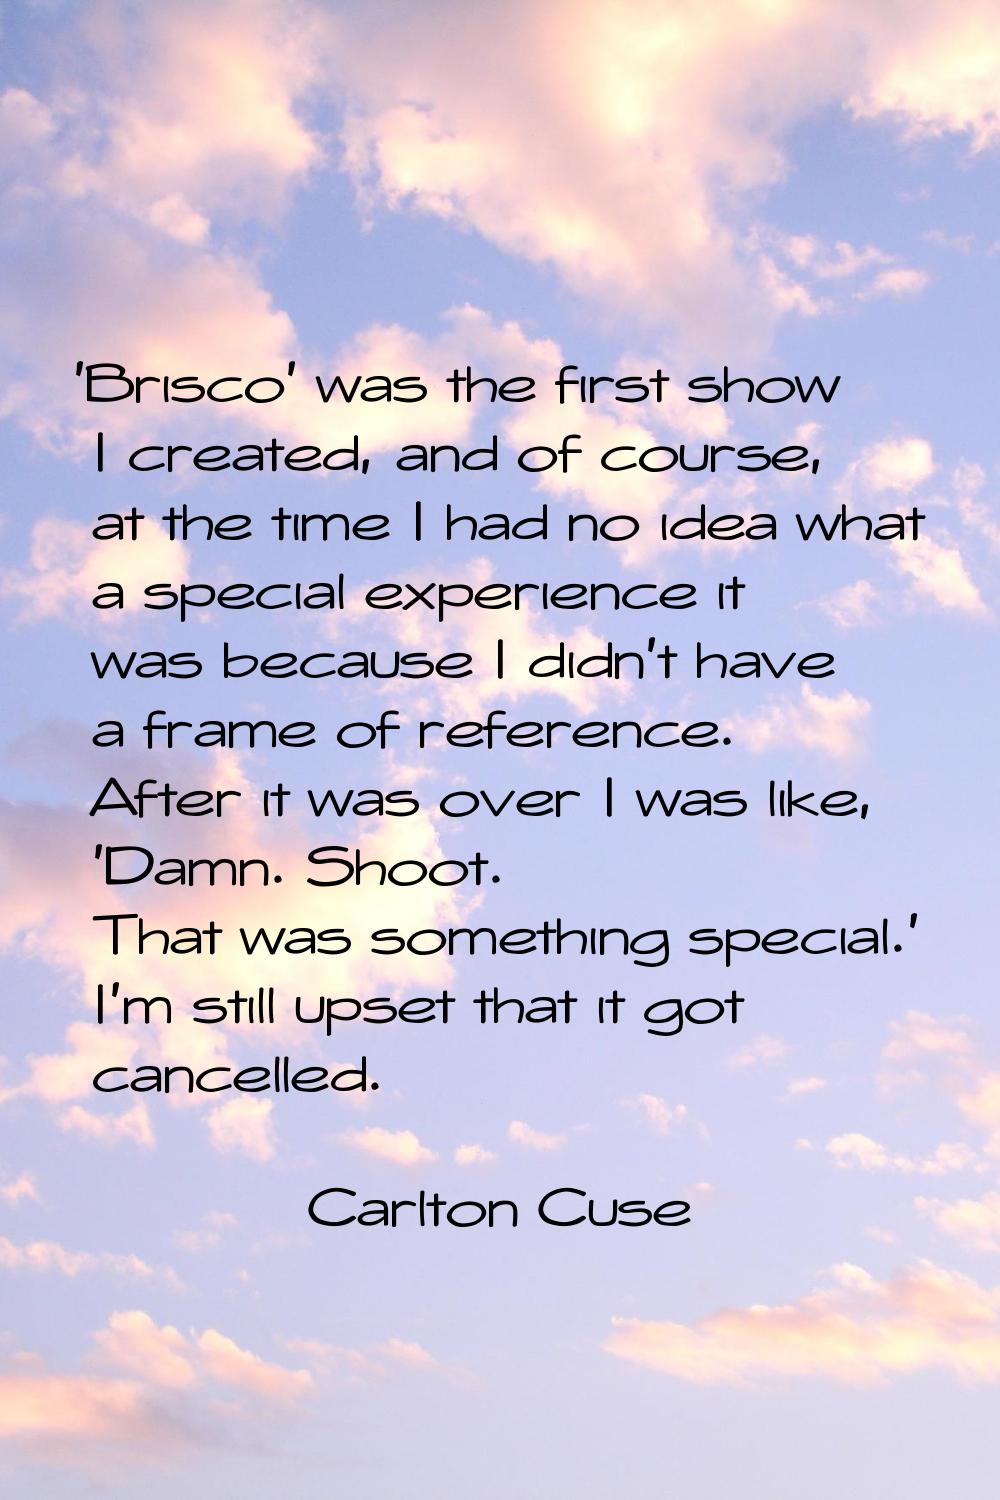 'Brisco' was the first show I created, and of course, at the time I had no idea what a special expe